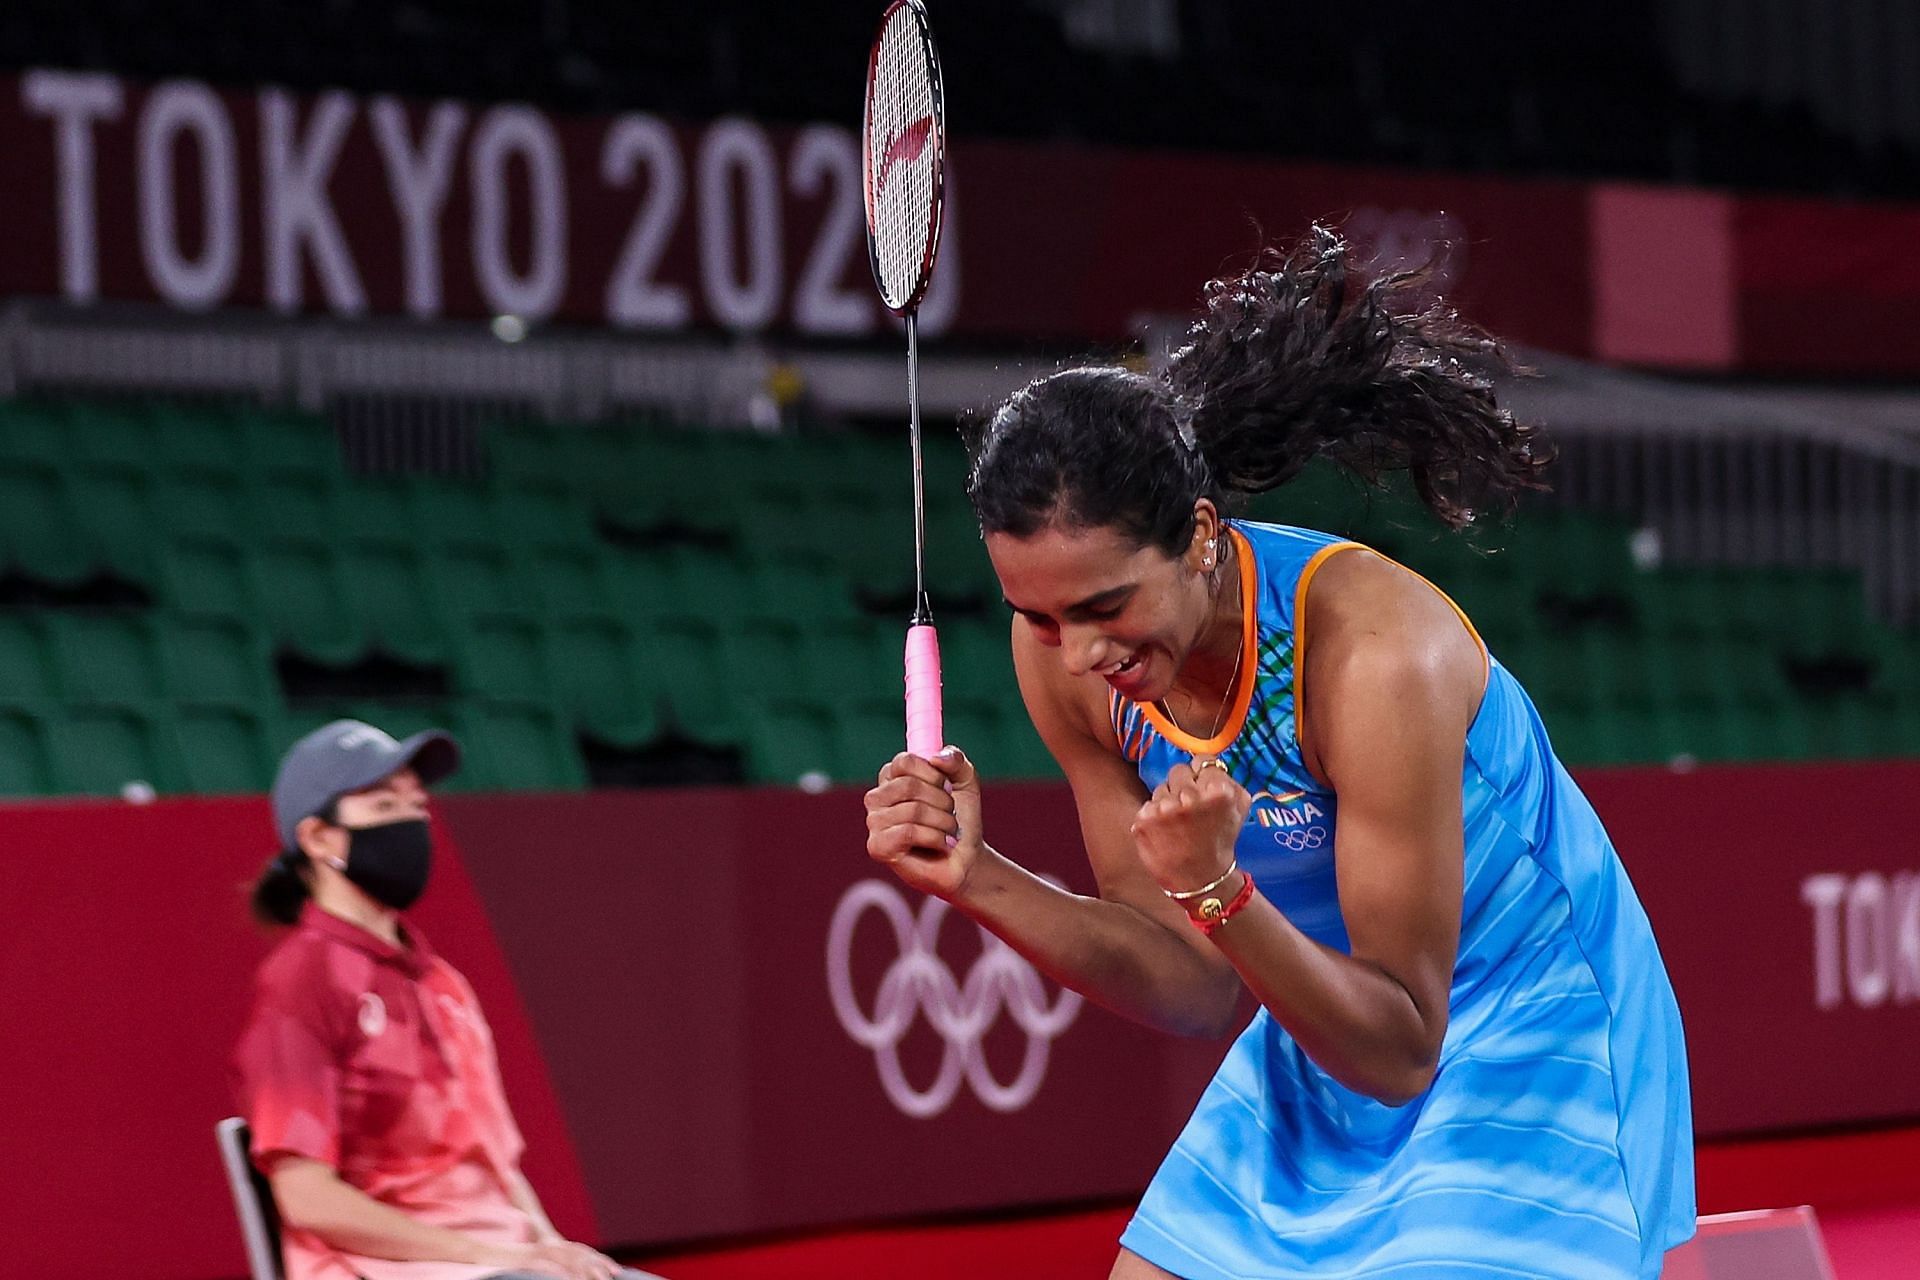 PV Sindhu exults after winning a point at the Tokyo Olympics